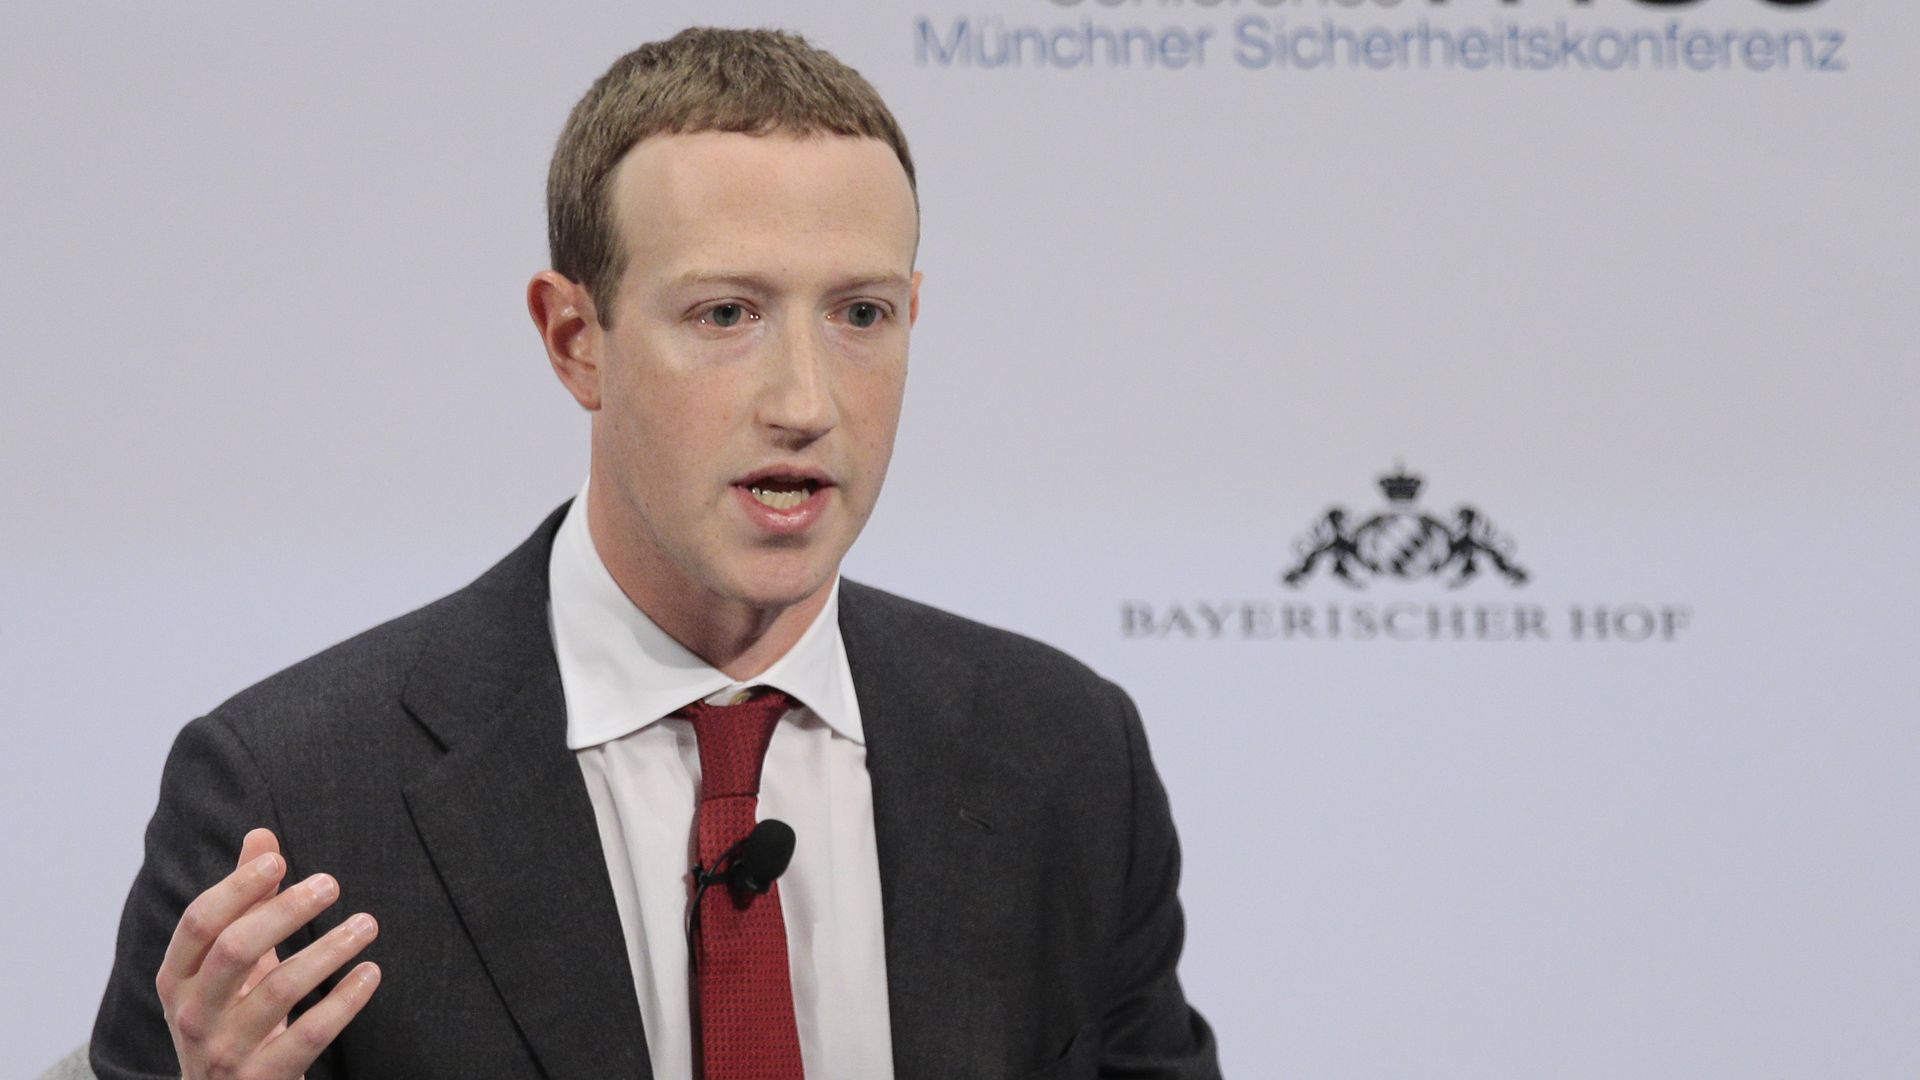 Founder and CEO of Facebook Mark Zuckerberg makes a speech as he attends the 56th Munich Security Conference at Bayerischer Hof Hotel in Munich, Germany on February 15